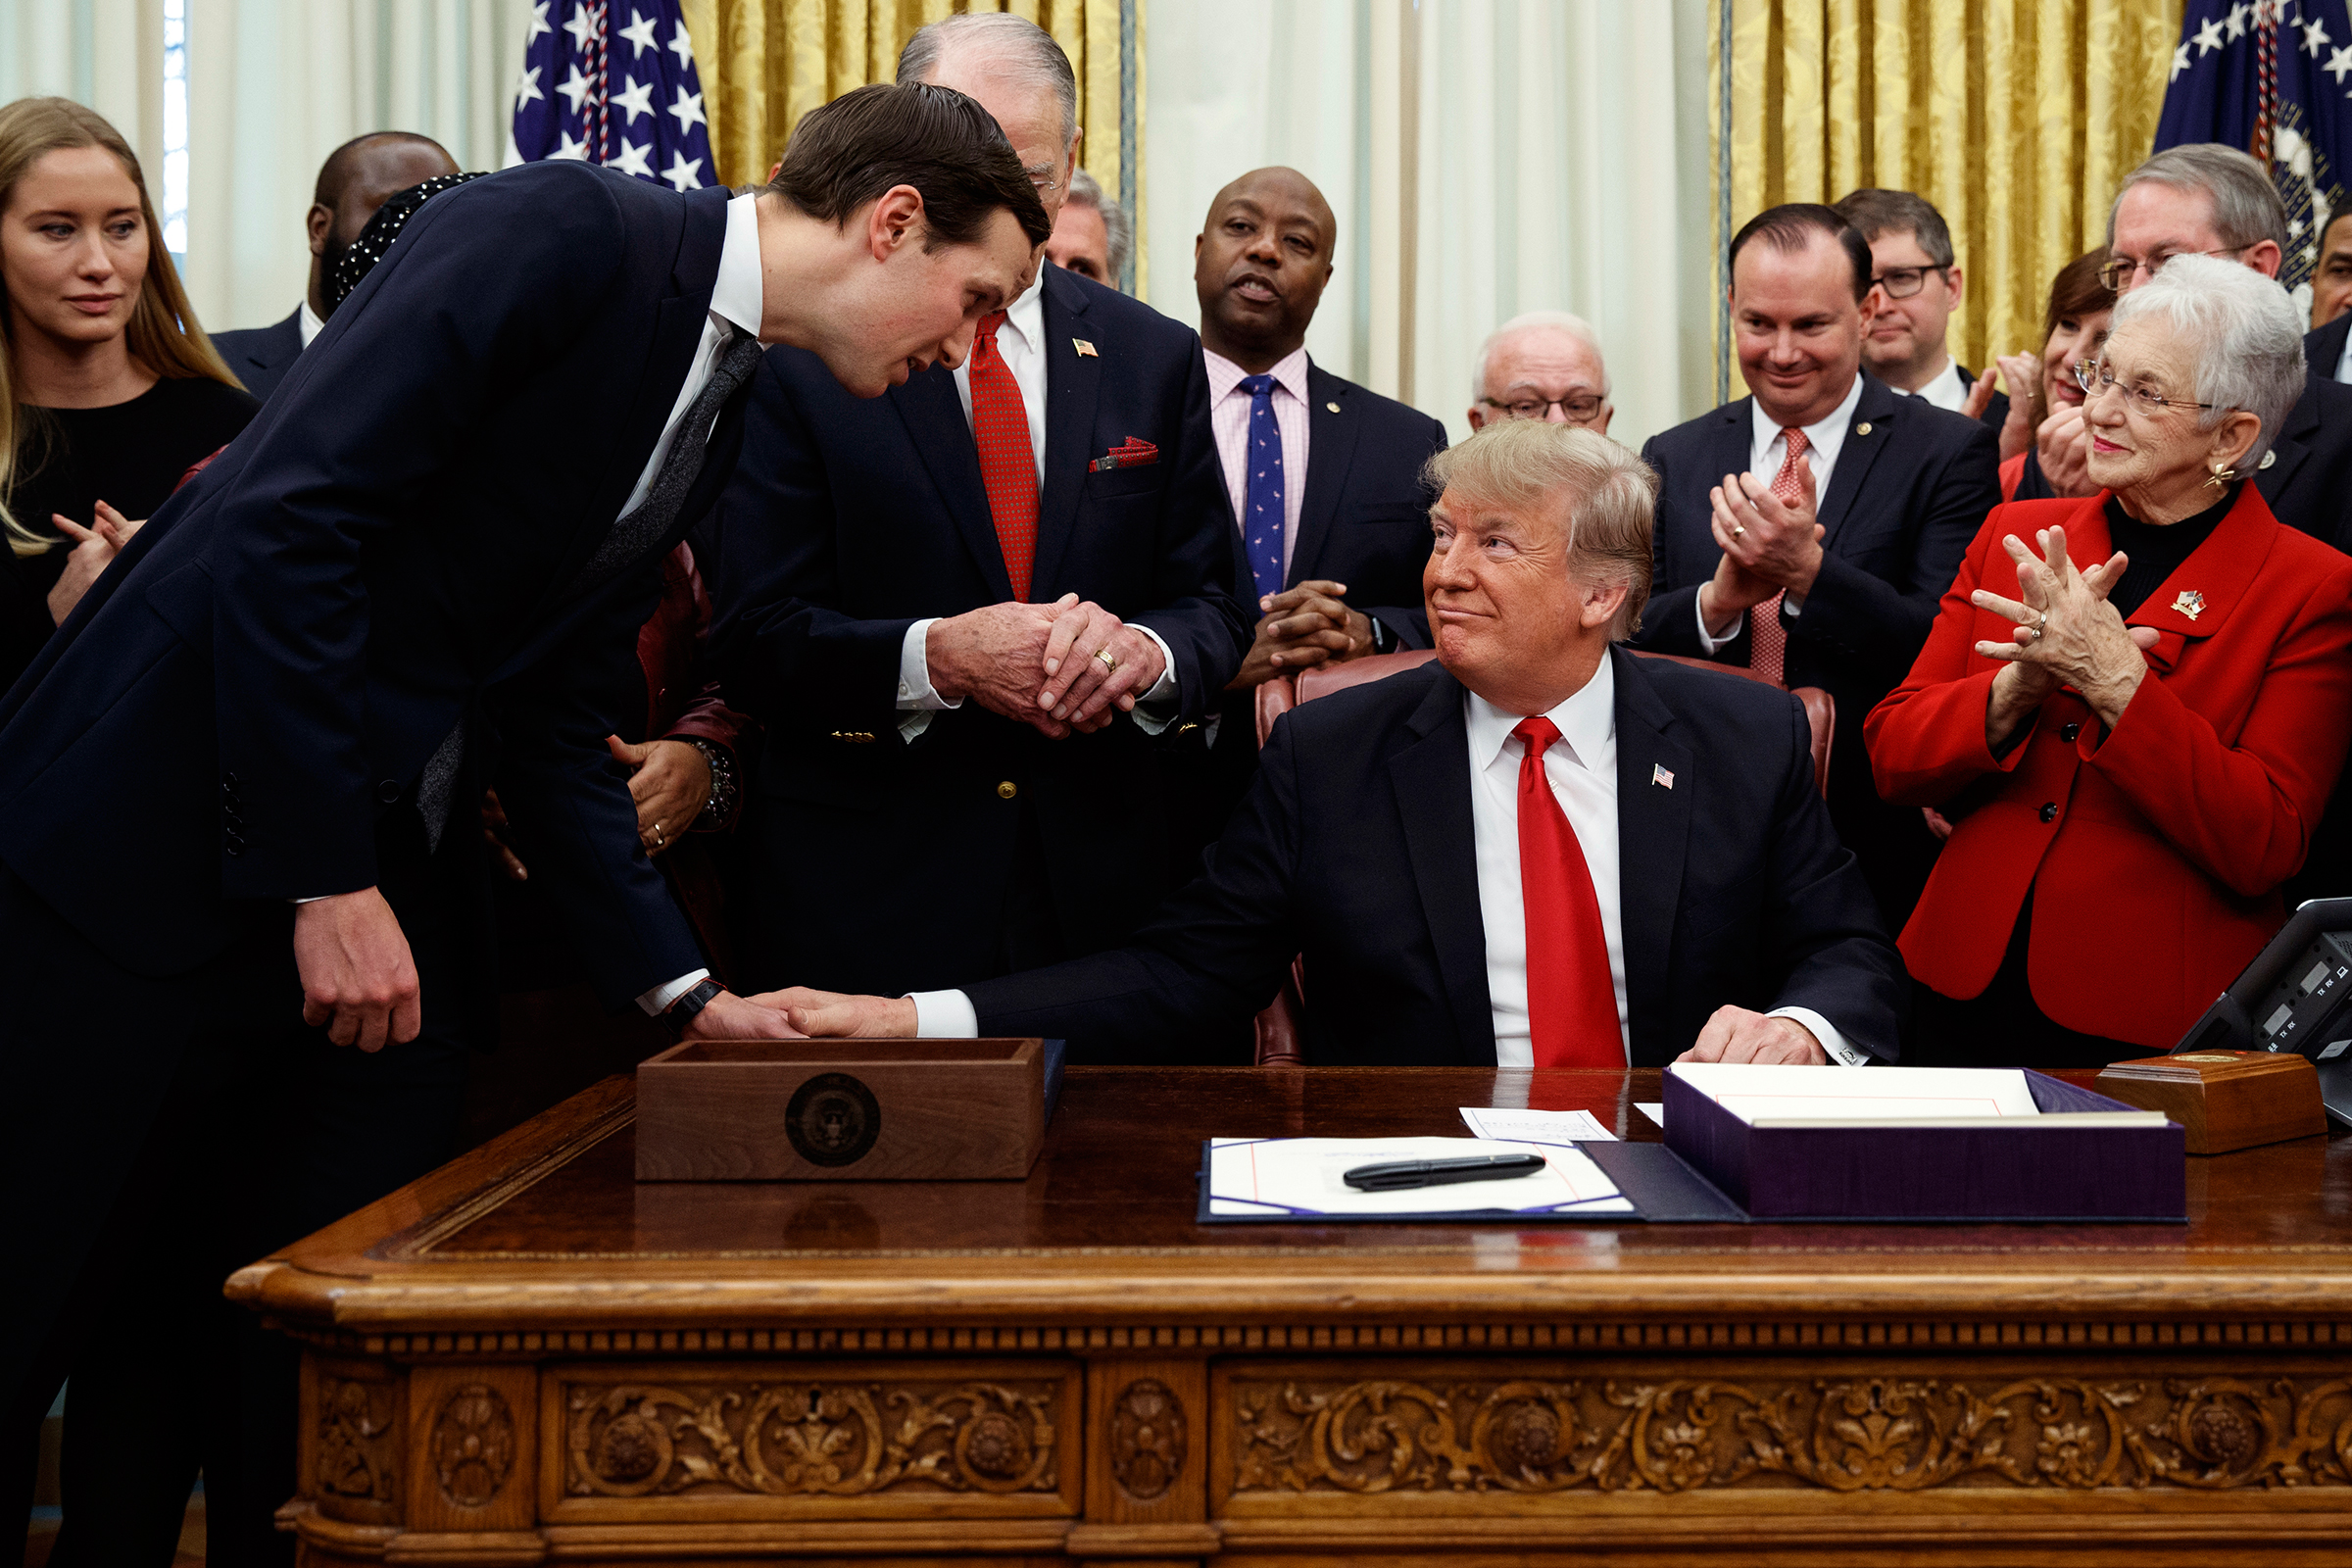 White House senior adviser Jared Kushner talks with President Donald Trump during a signing ceremony for criminal justice reform legislation in the Oval Office of the White House, Dec. 21, 2018. (Evan Vucci—AP)